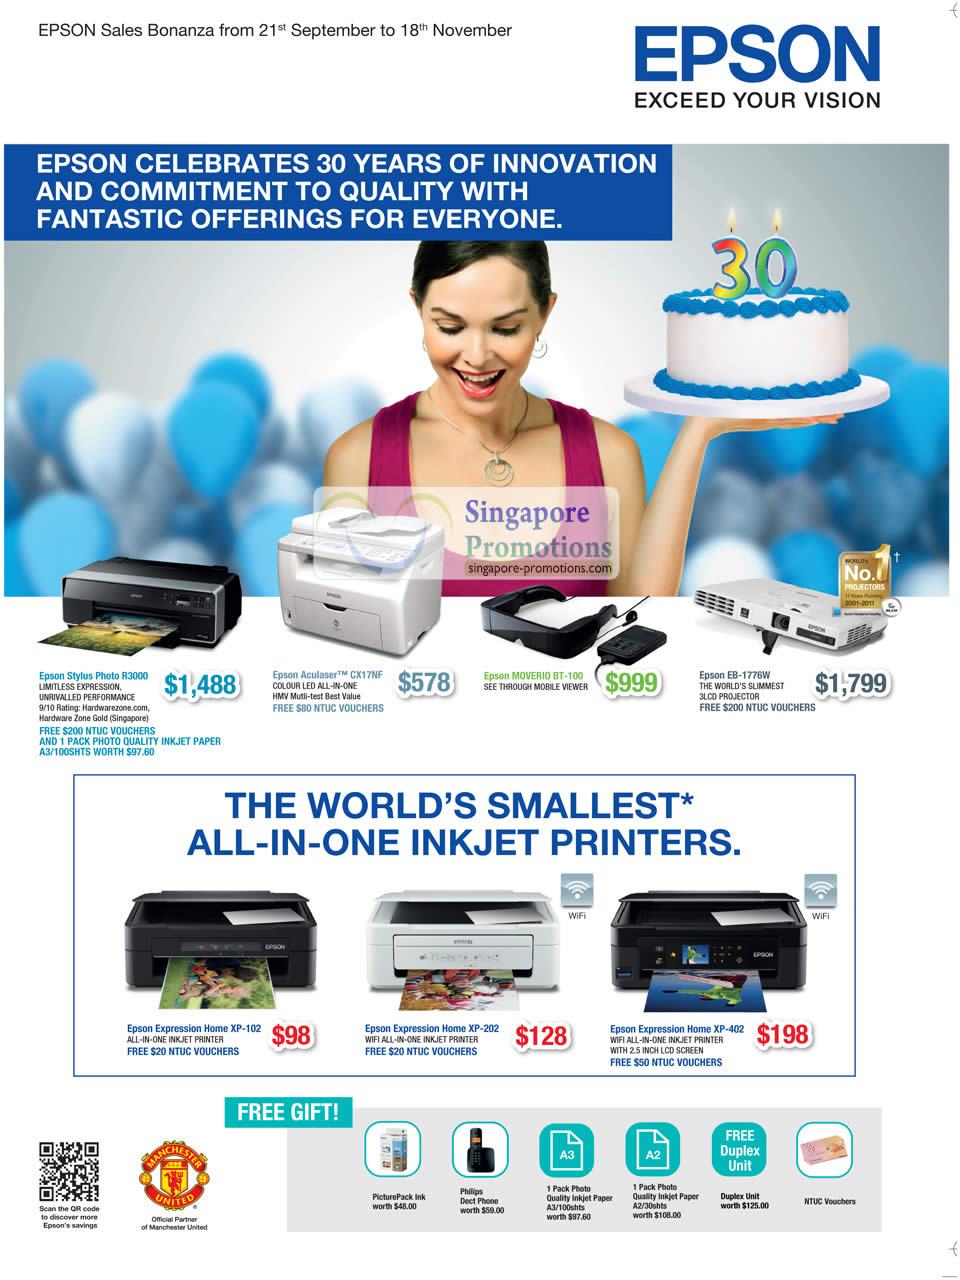 Featured image for Epson Printers, Projectors & Scanners Promotion Price List 21 Sep - 18 Nov 2012